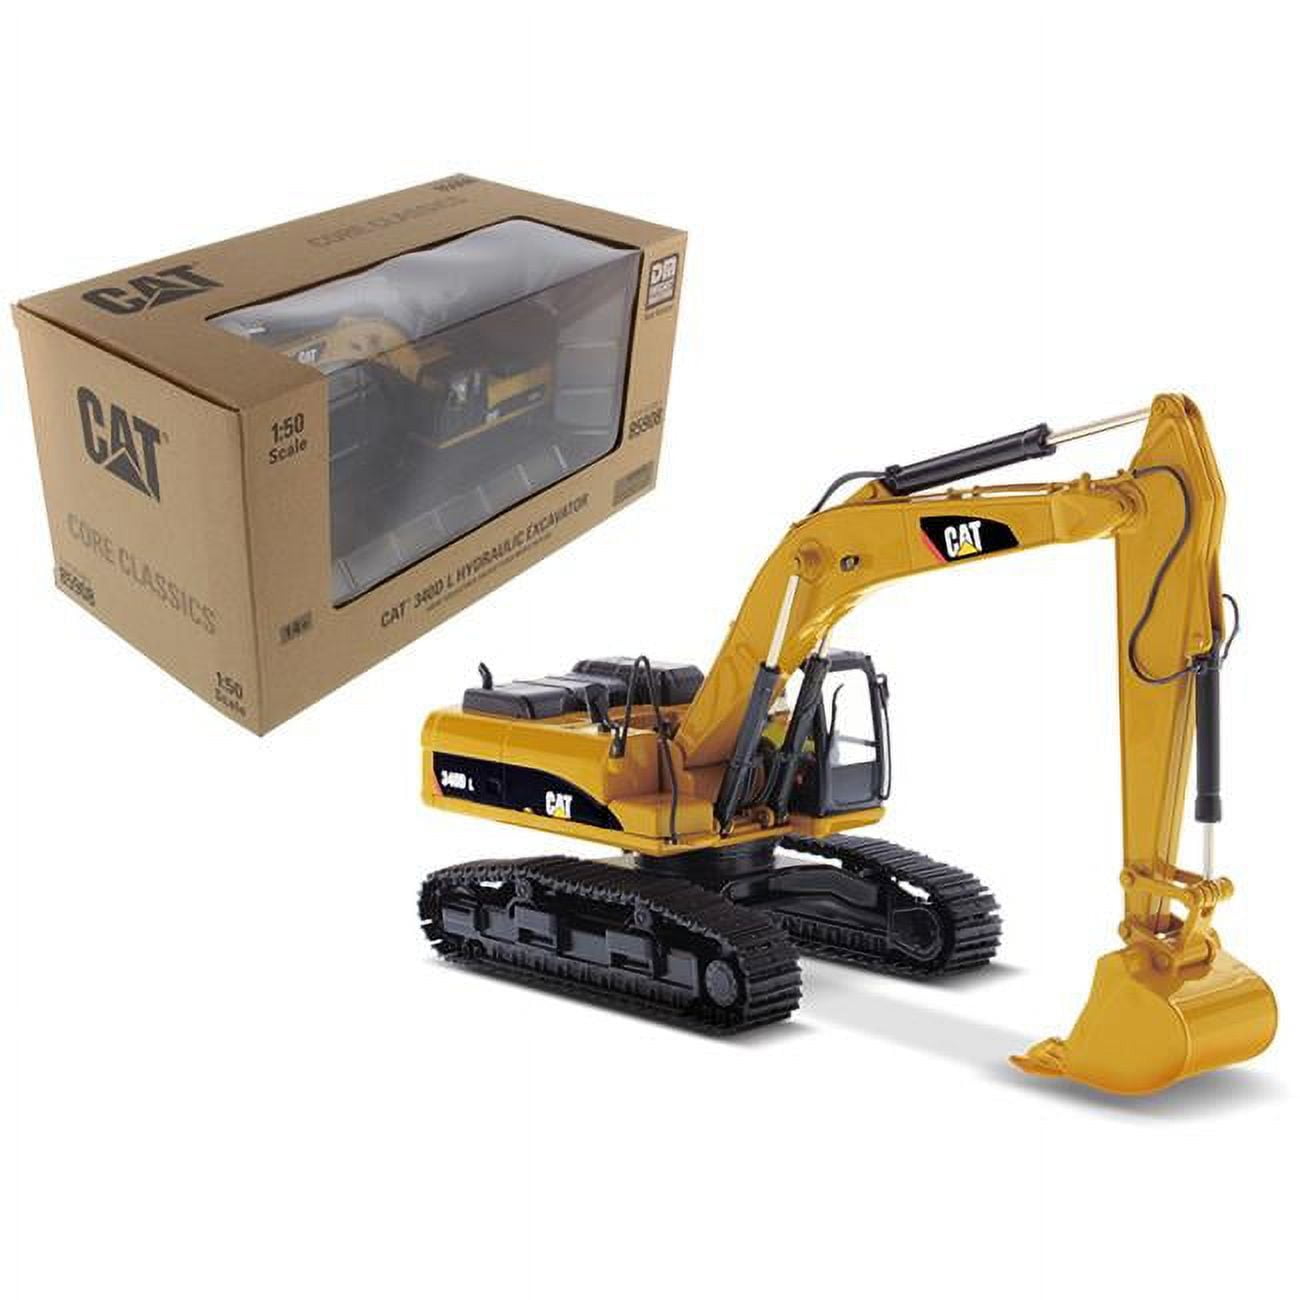 85908c 1 By 50 Scale Diecast Hydraulic Excavator For Cat Caterpillar 340d L Model